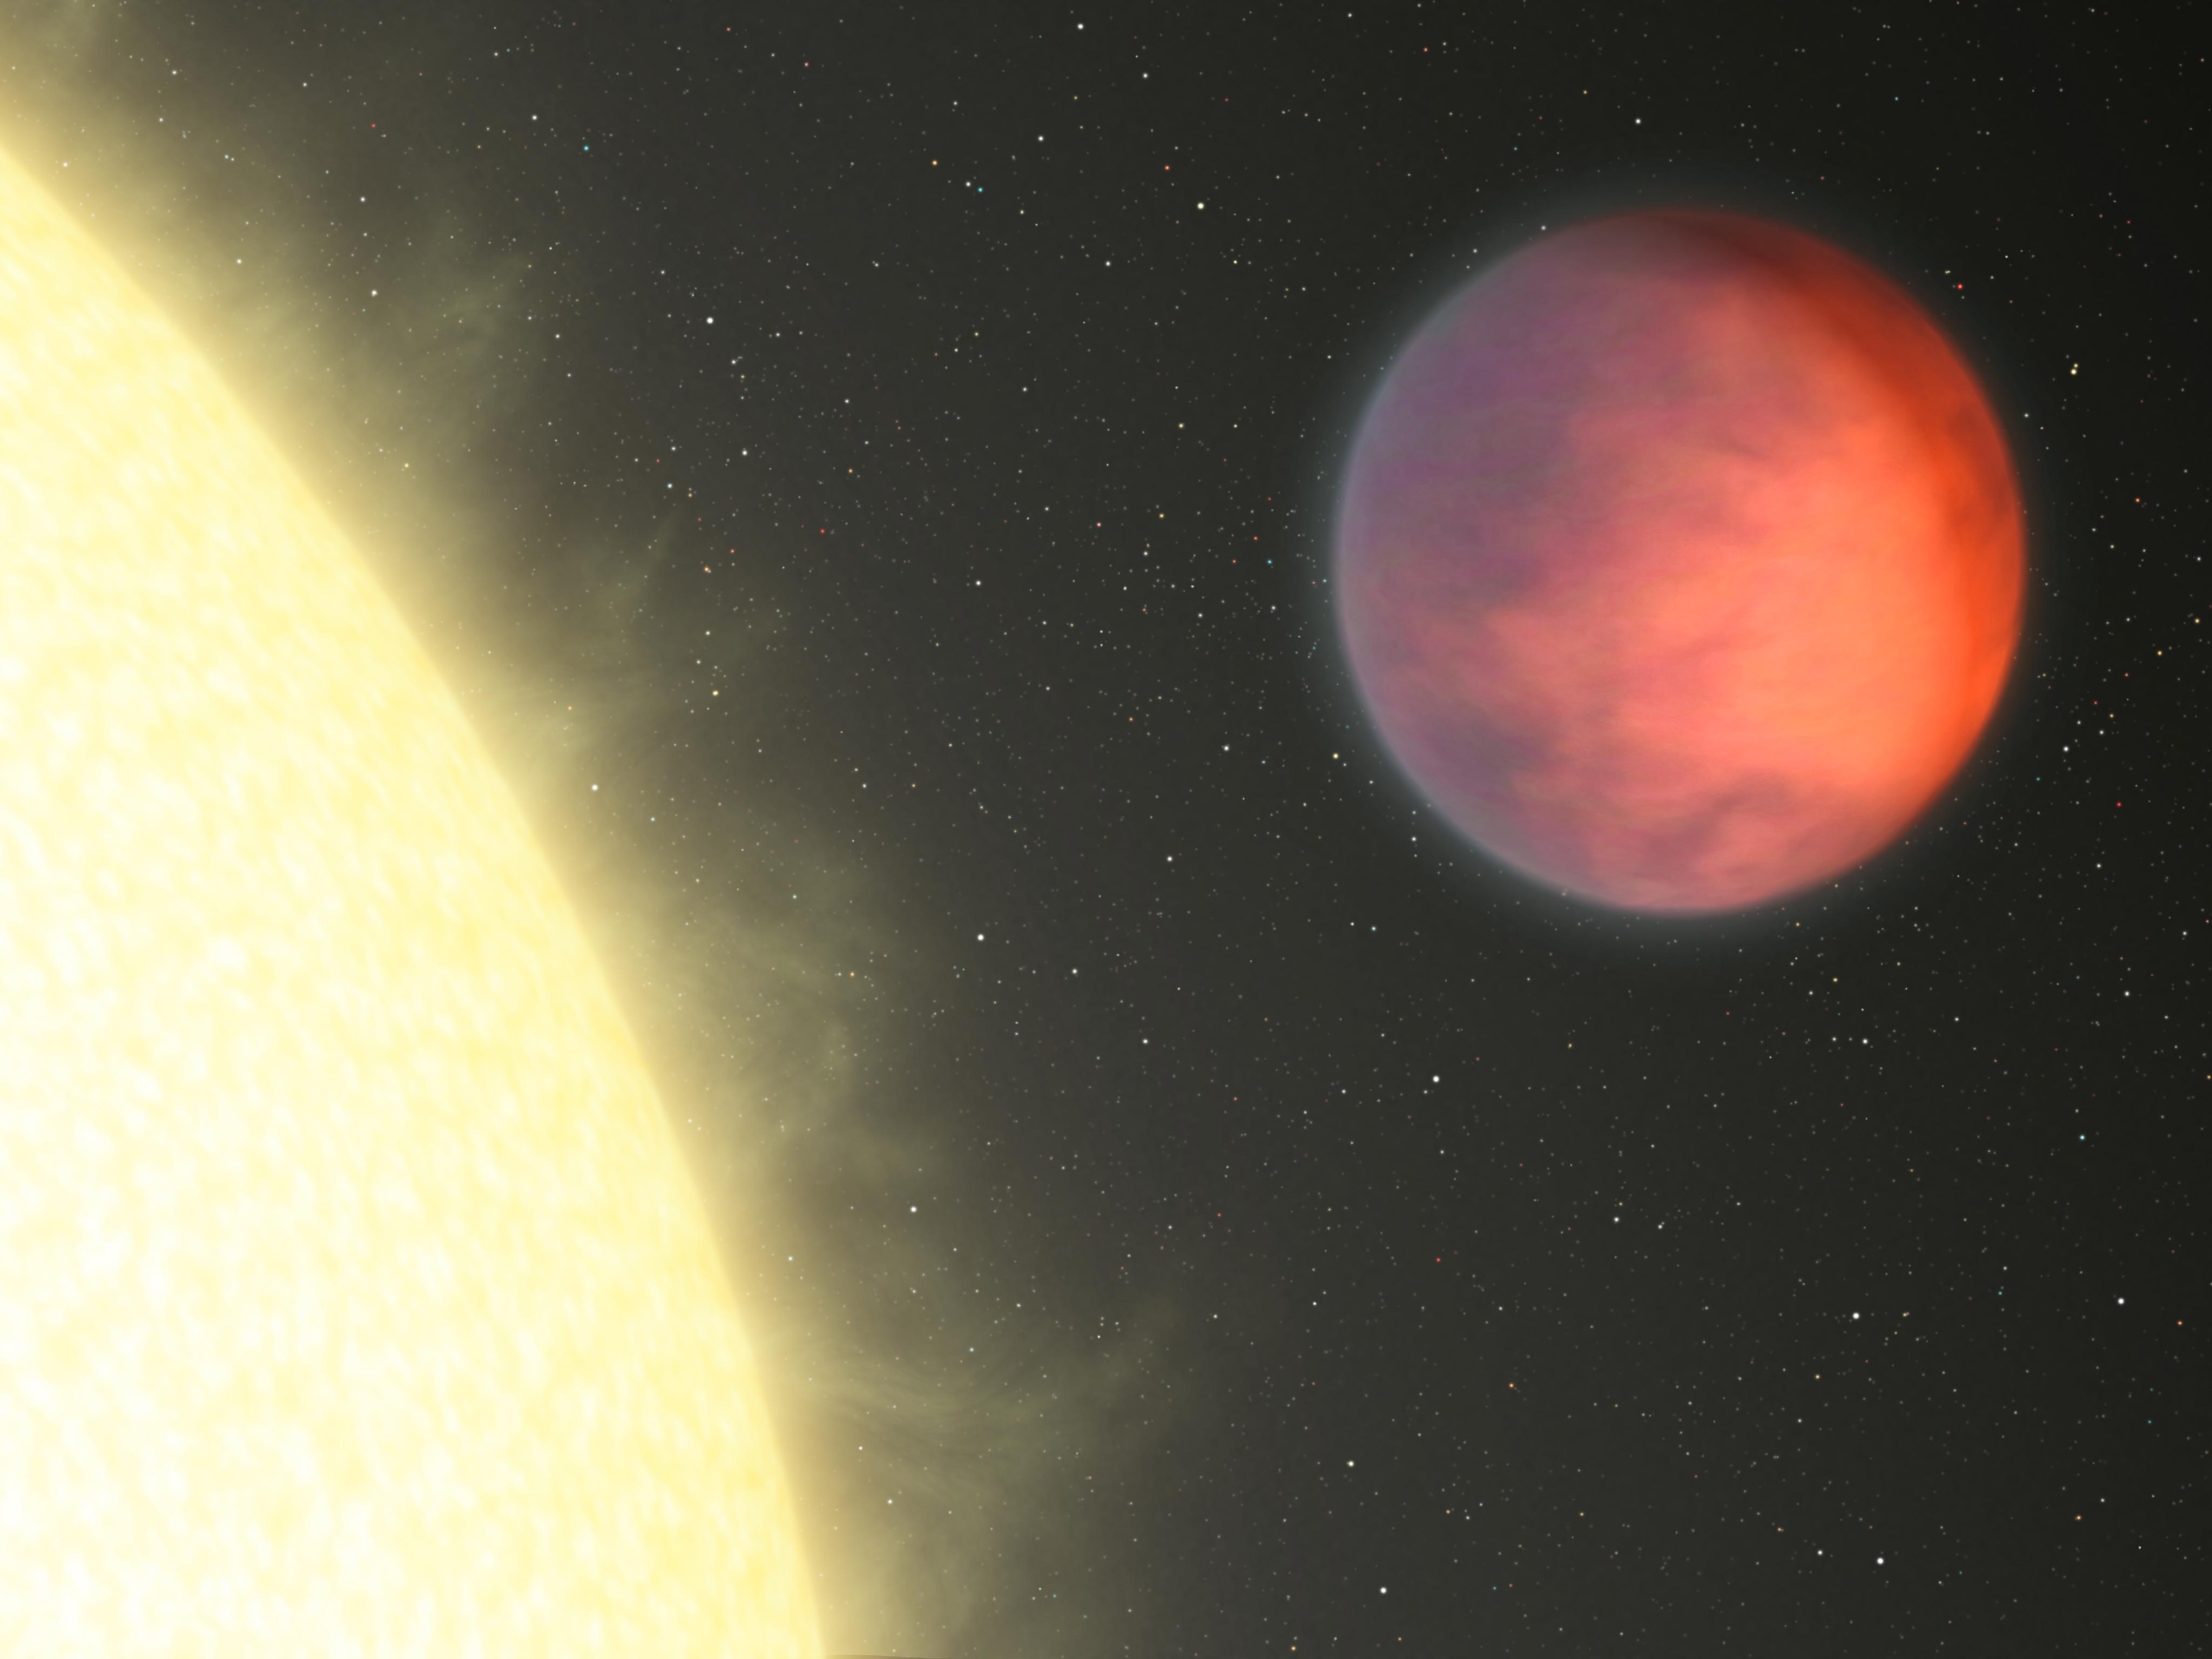 PIA13493: Planetary Hot Spot Not Under the Glare of Star (Artist Concept)